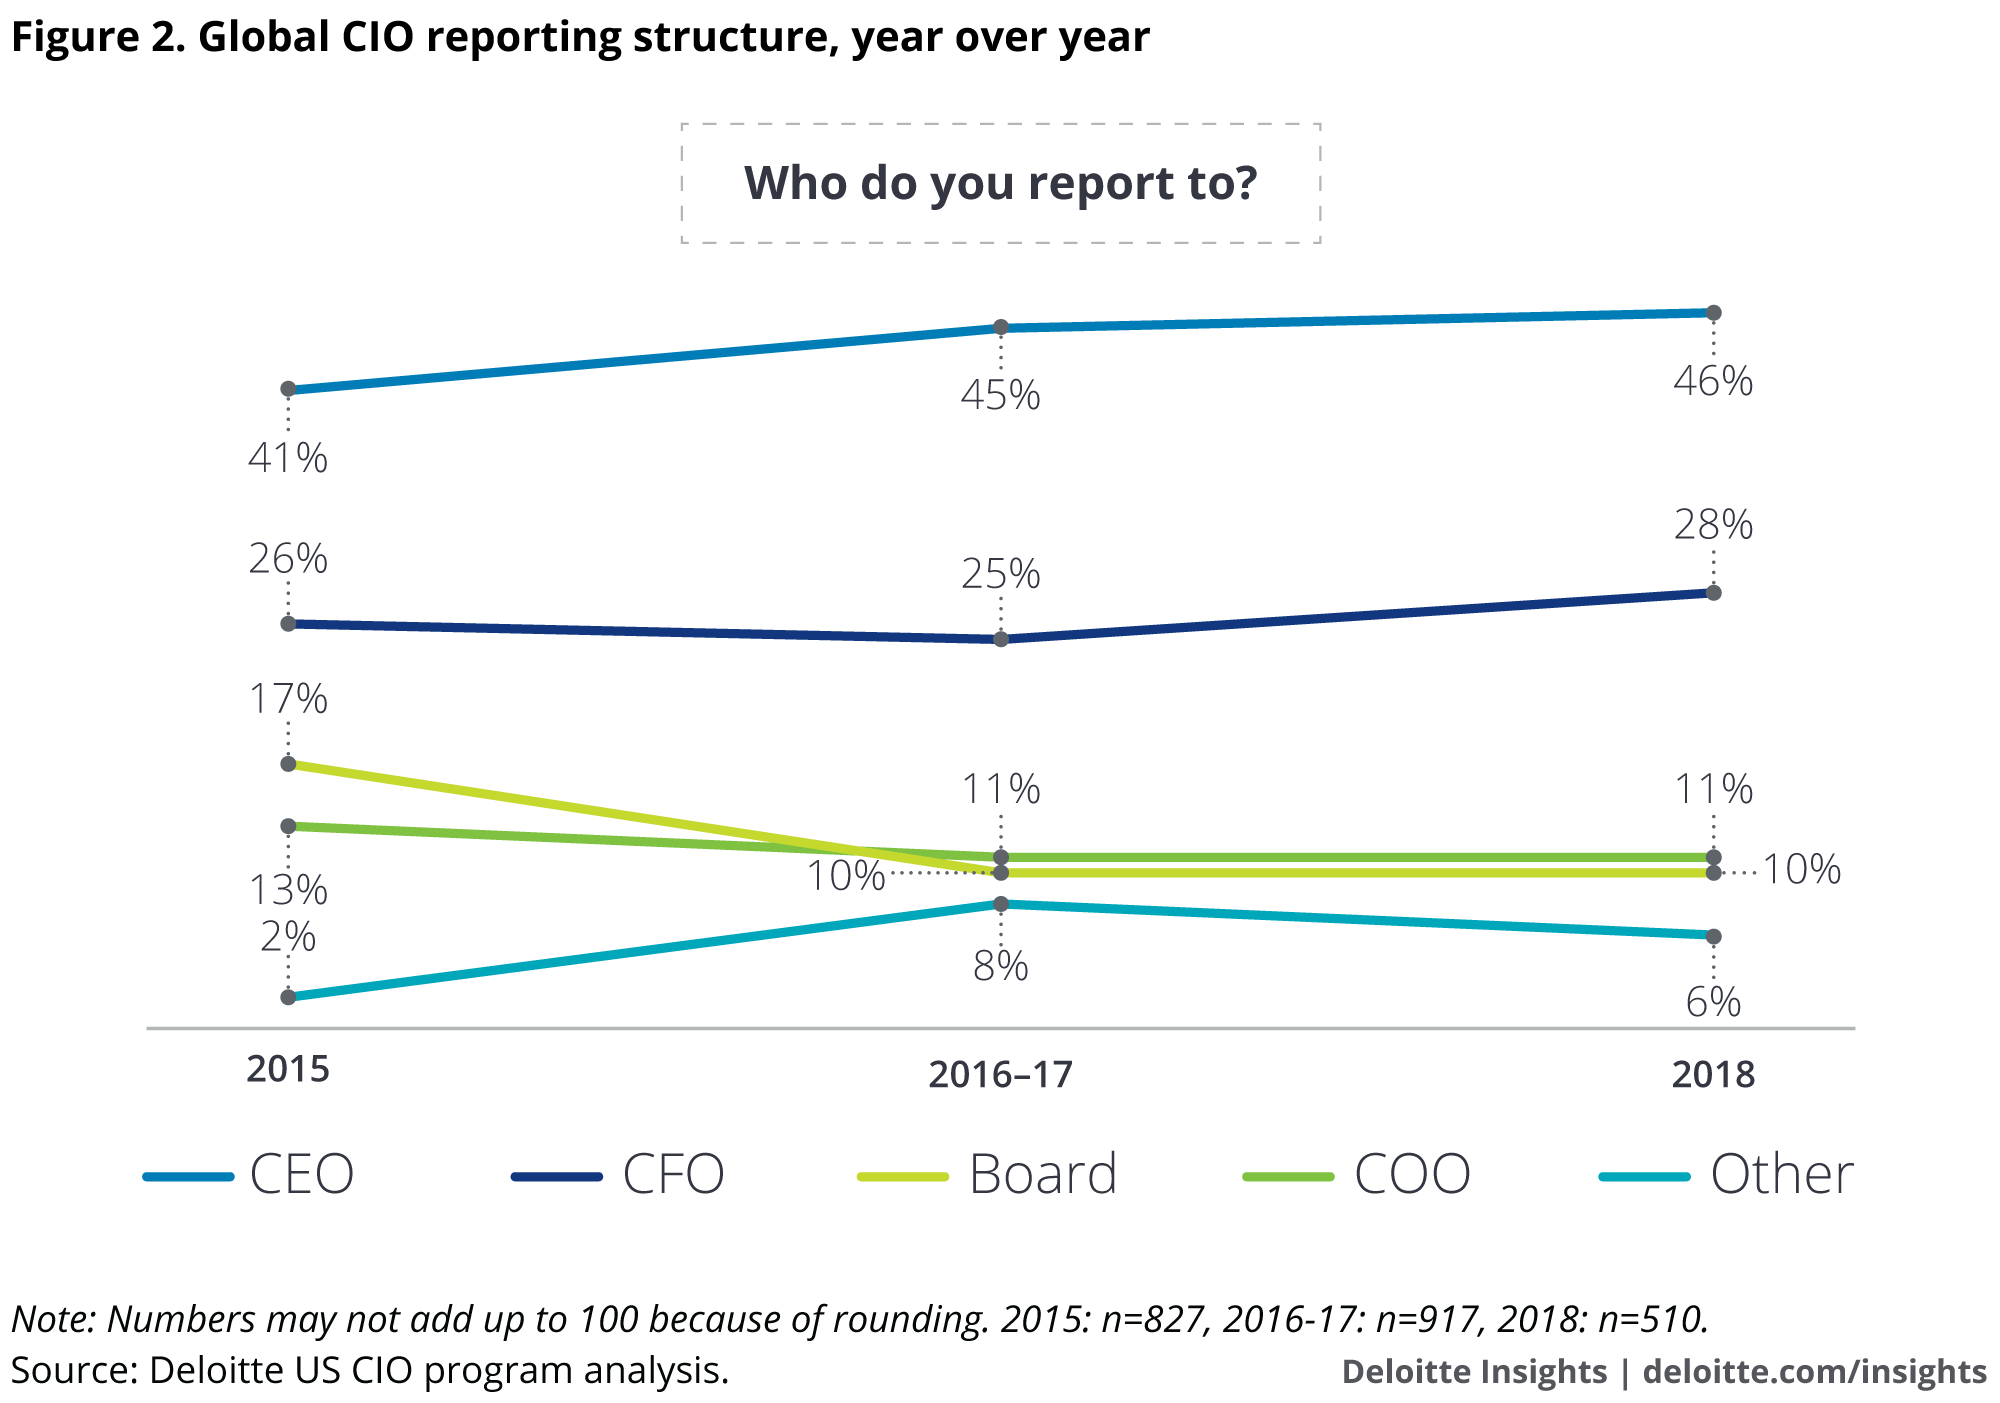 Global CIO reporting structure, year over year